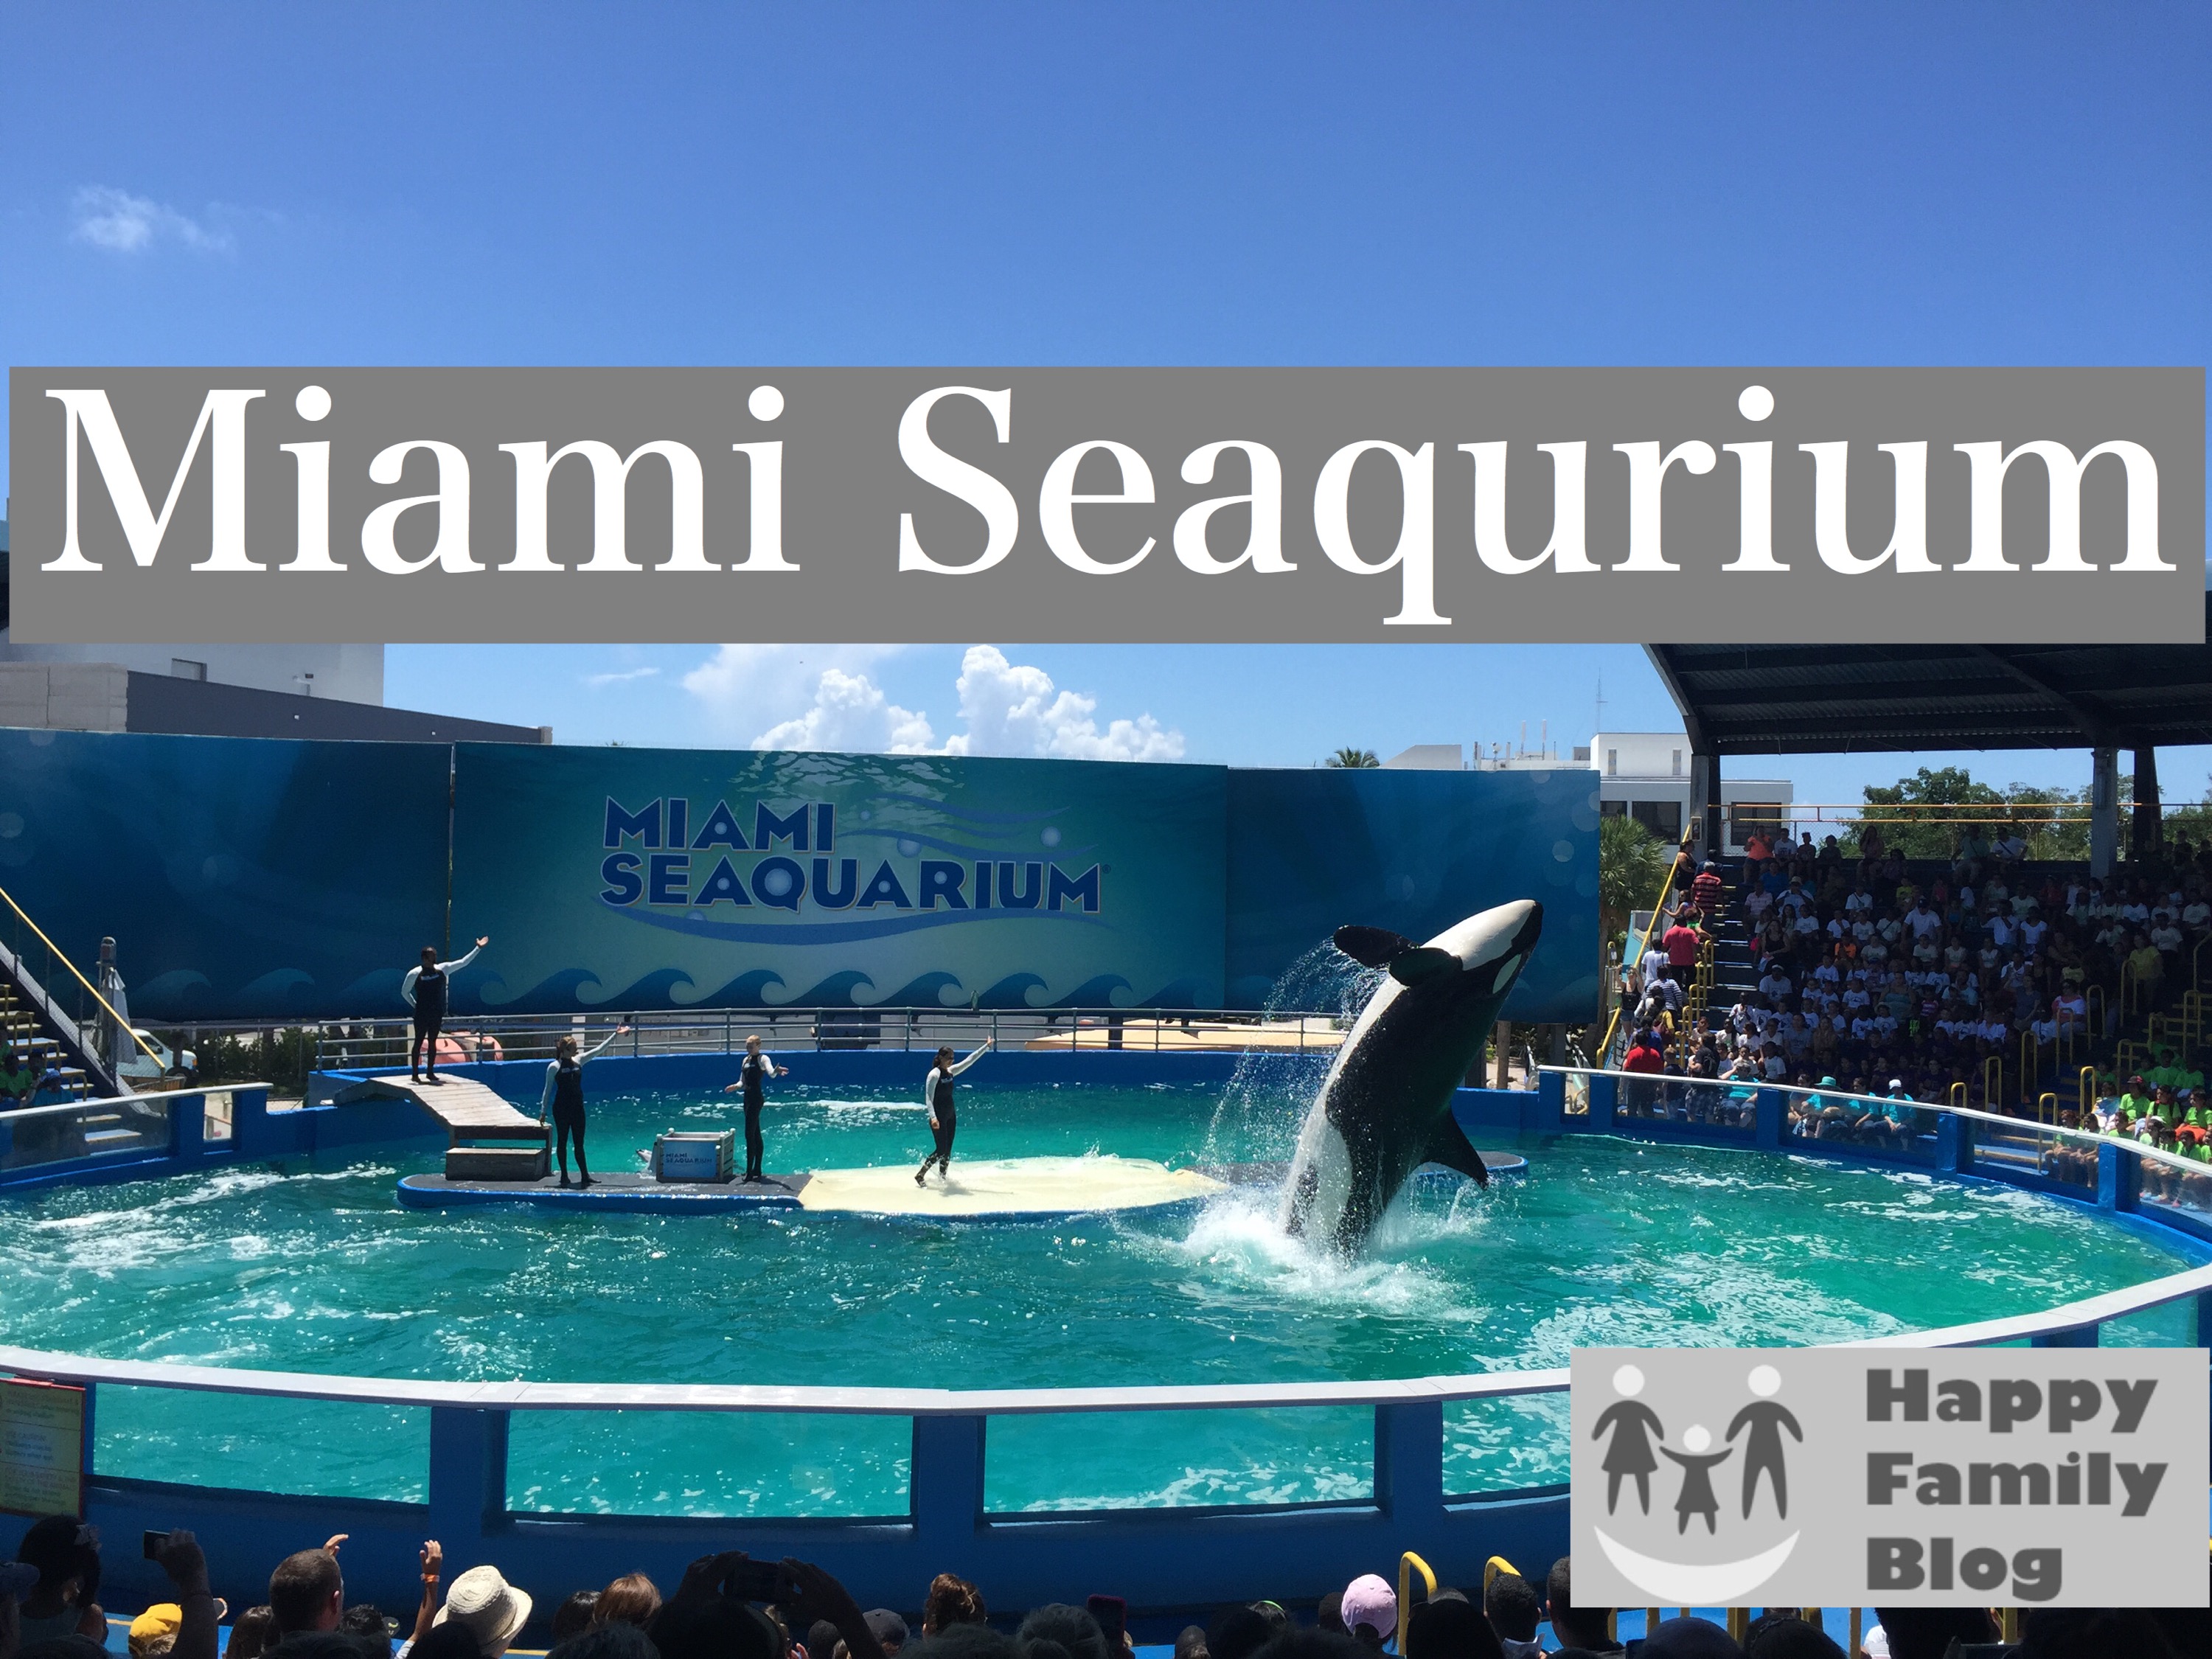 Miami seaquarium, miami seaquarium hours, Miami seaquarium prices, Miami seaquarium tickets, Miami seaquarium coupons